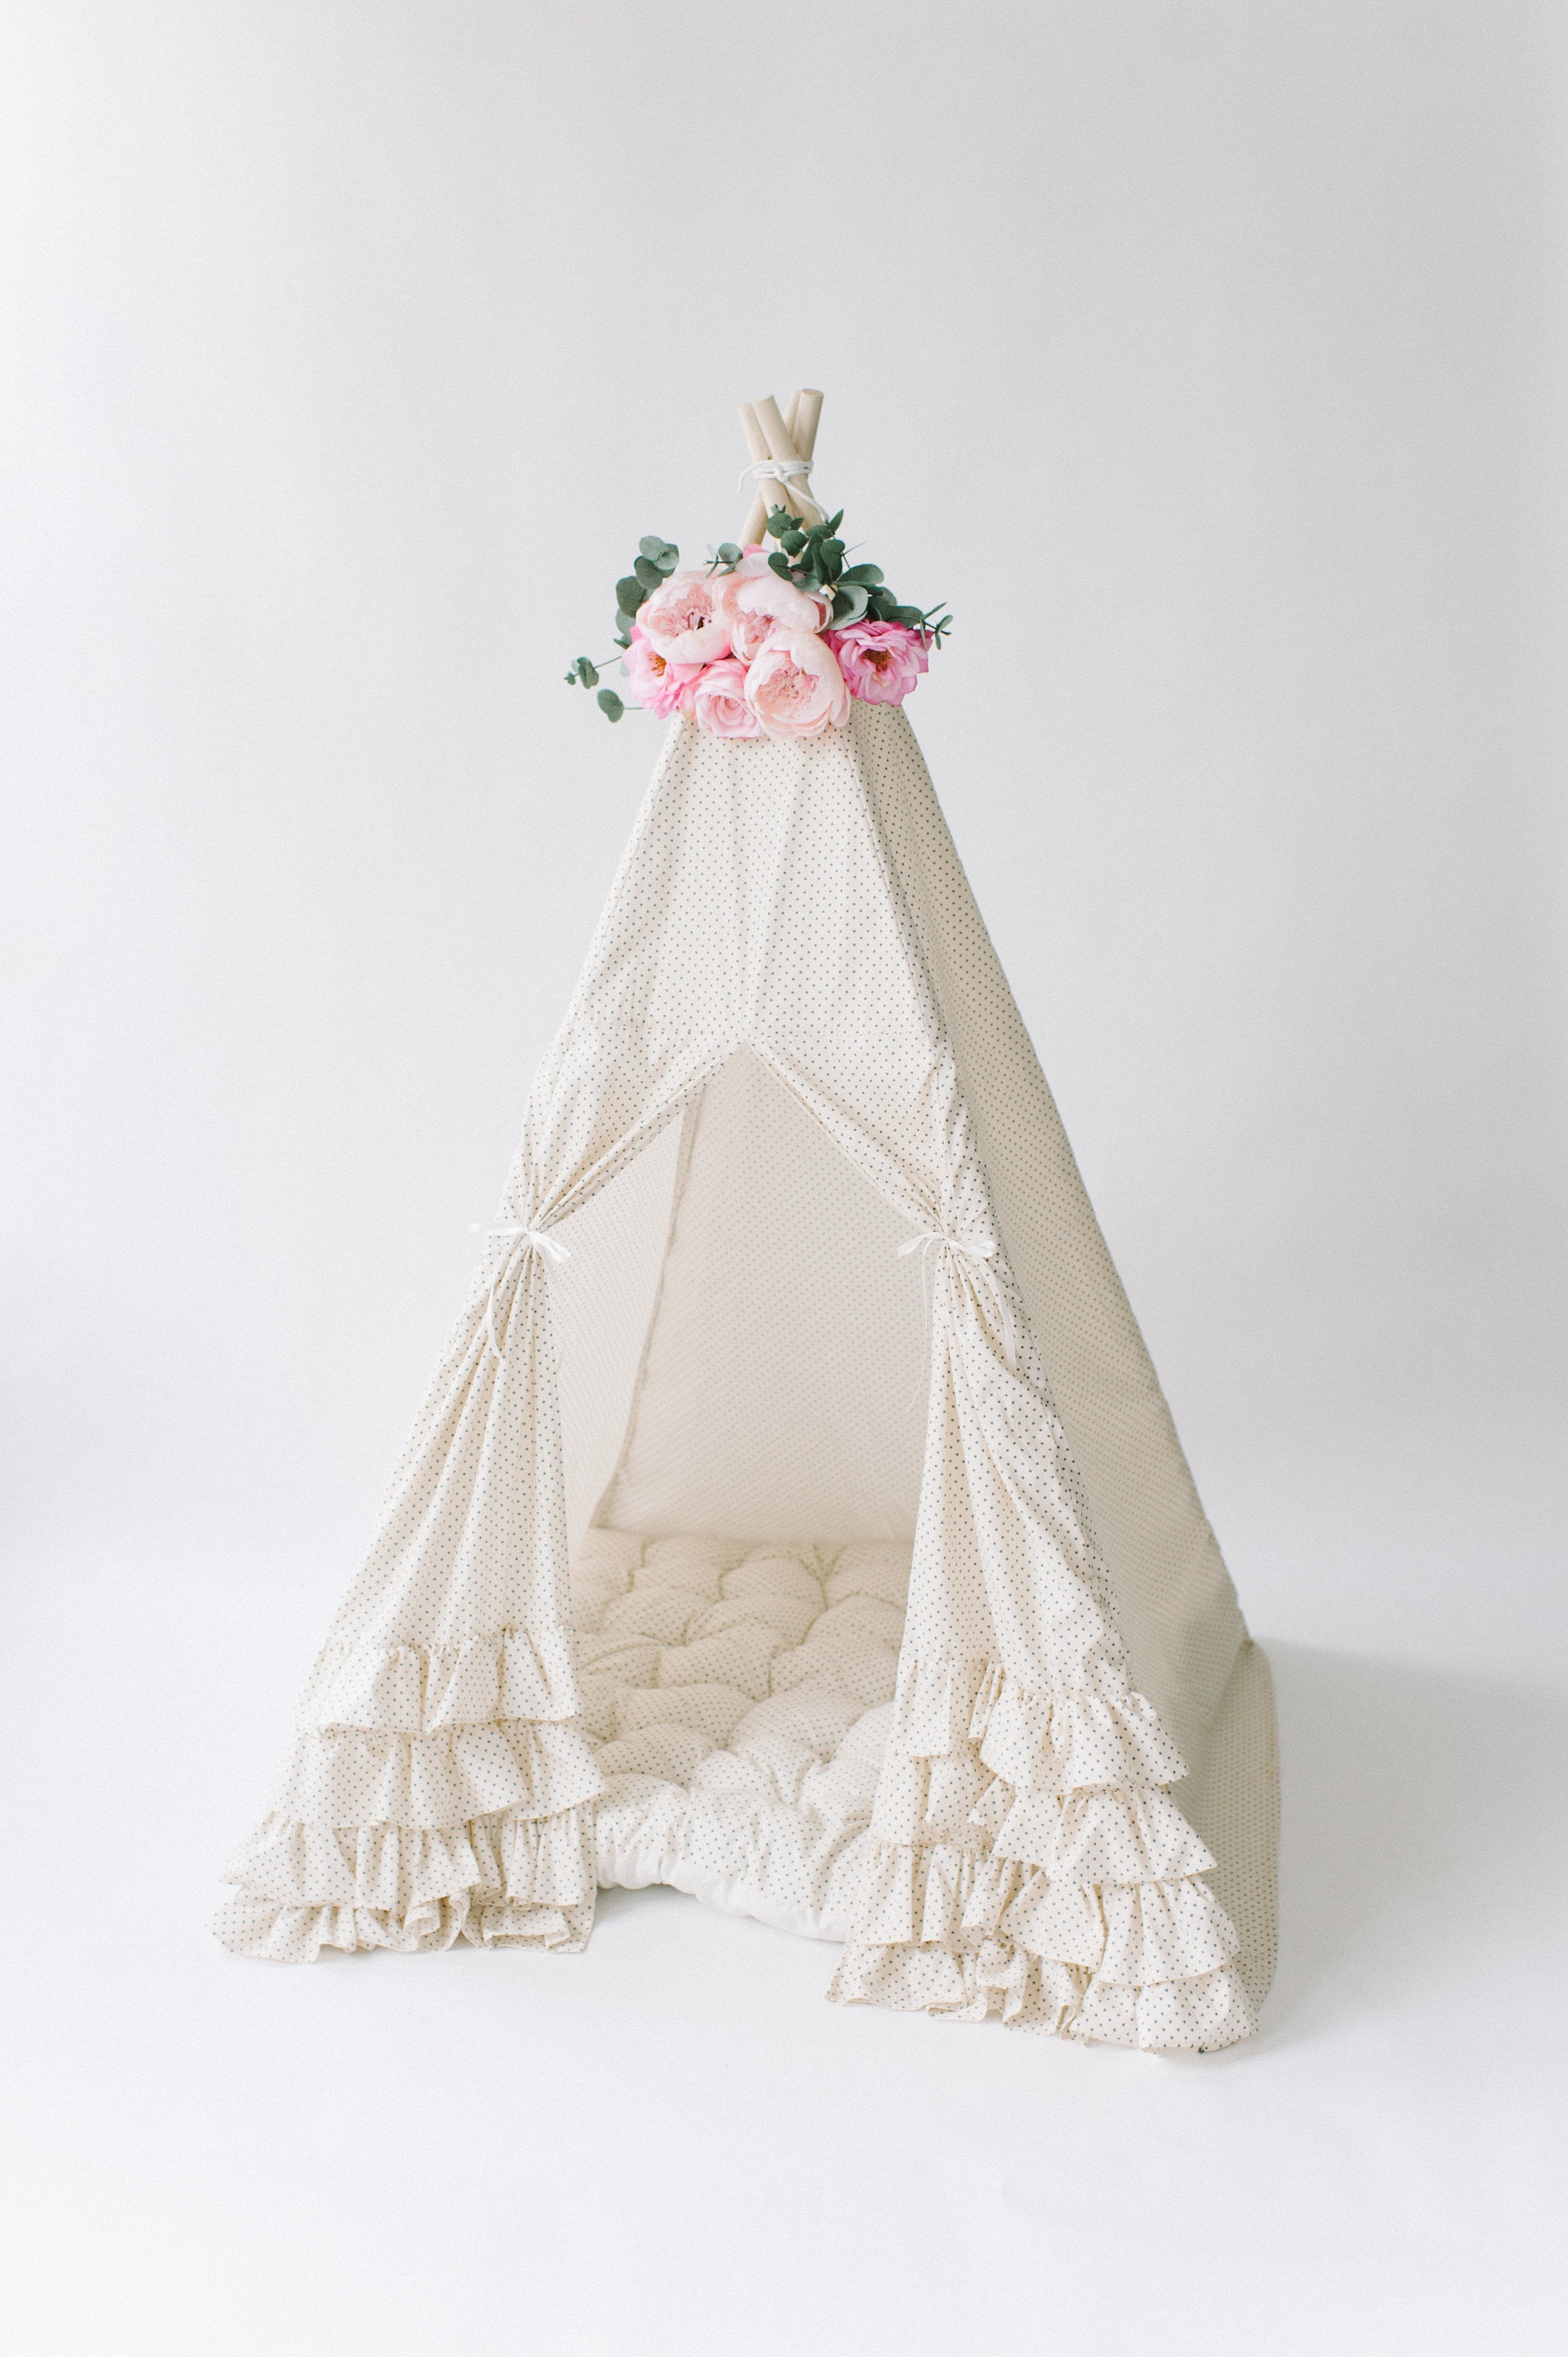 The Colette Play Tent